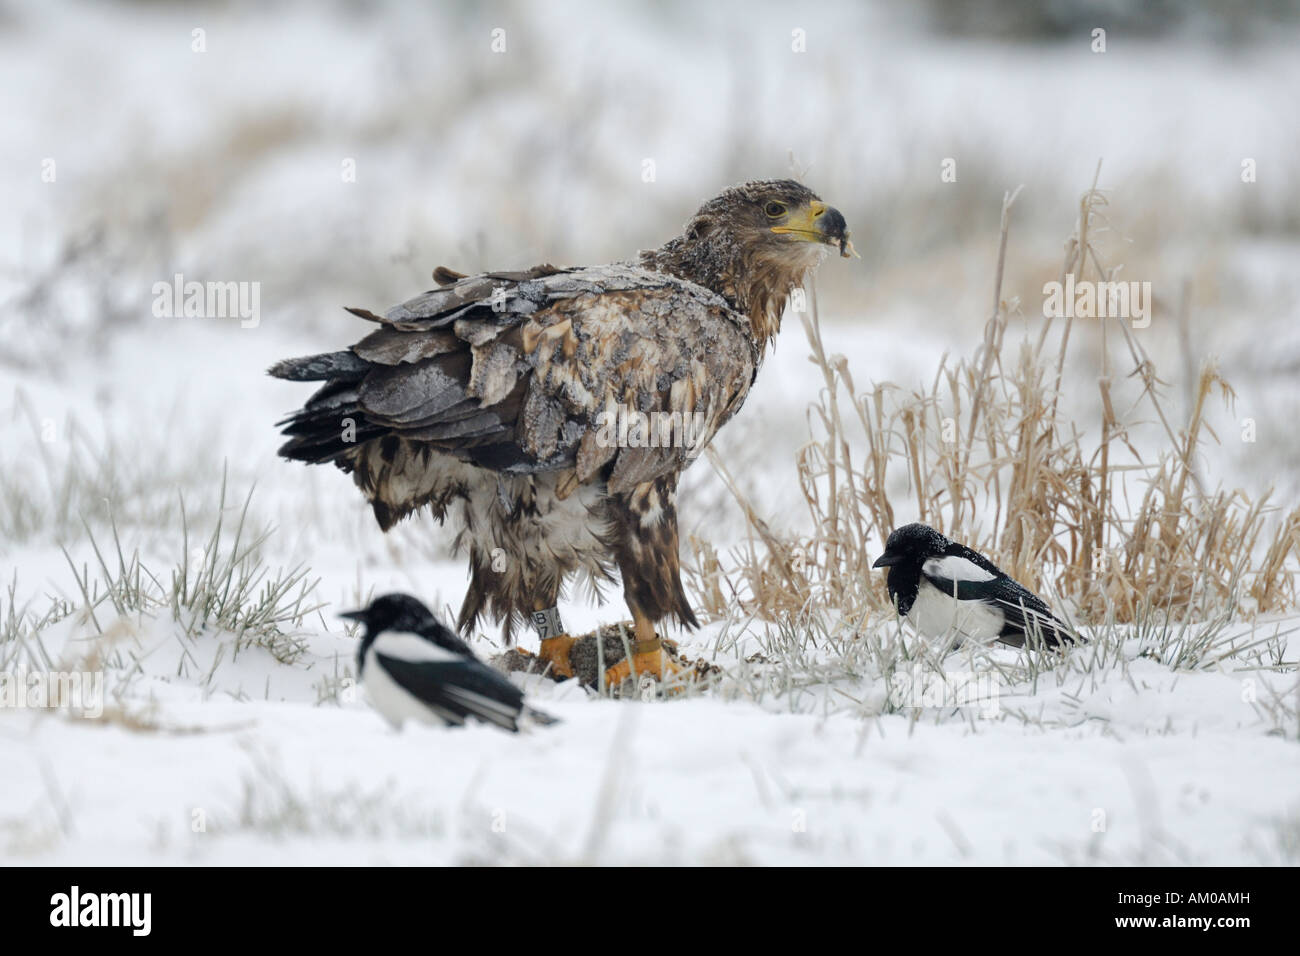 White Tailed Eagle with frosted plumage at the bait Stock Photo